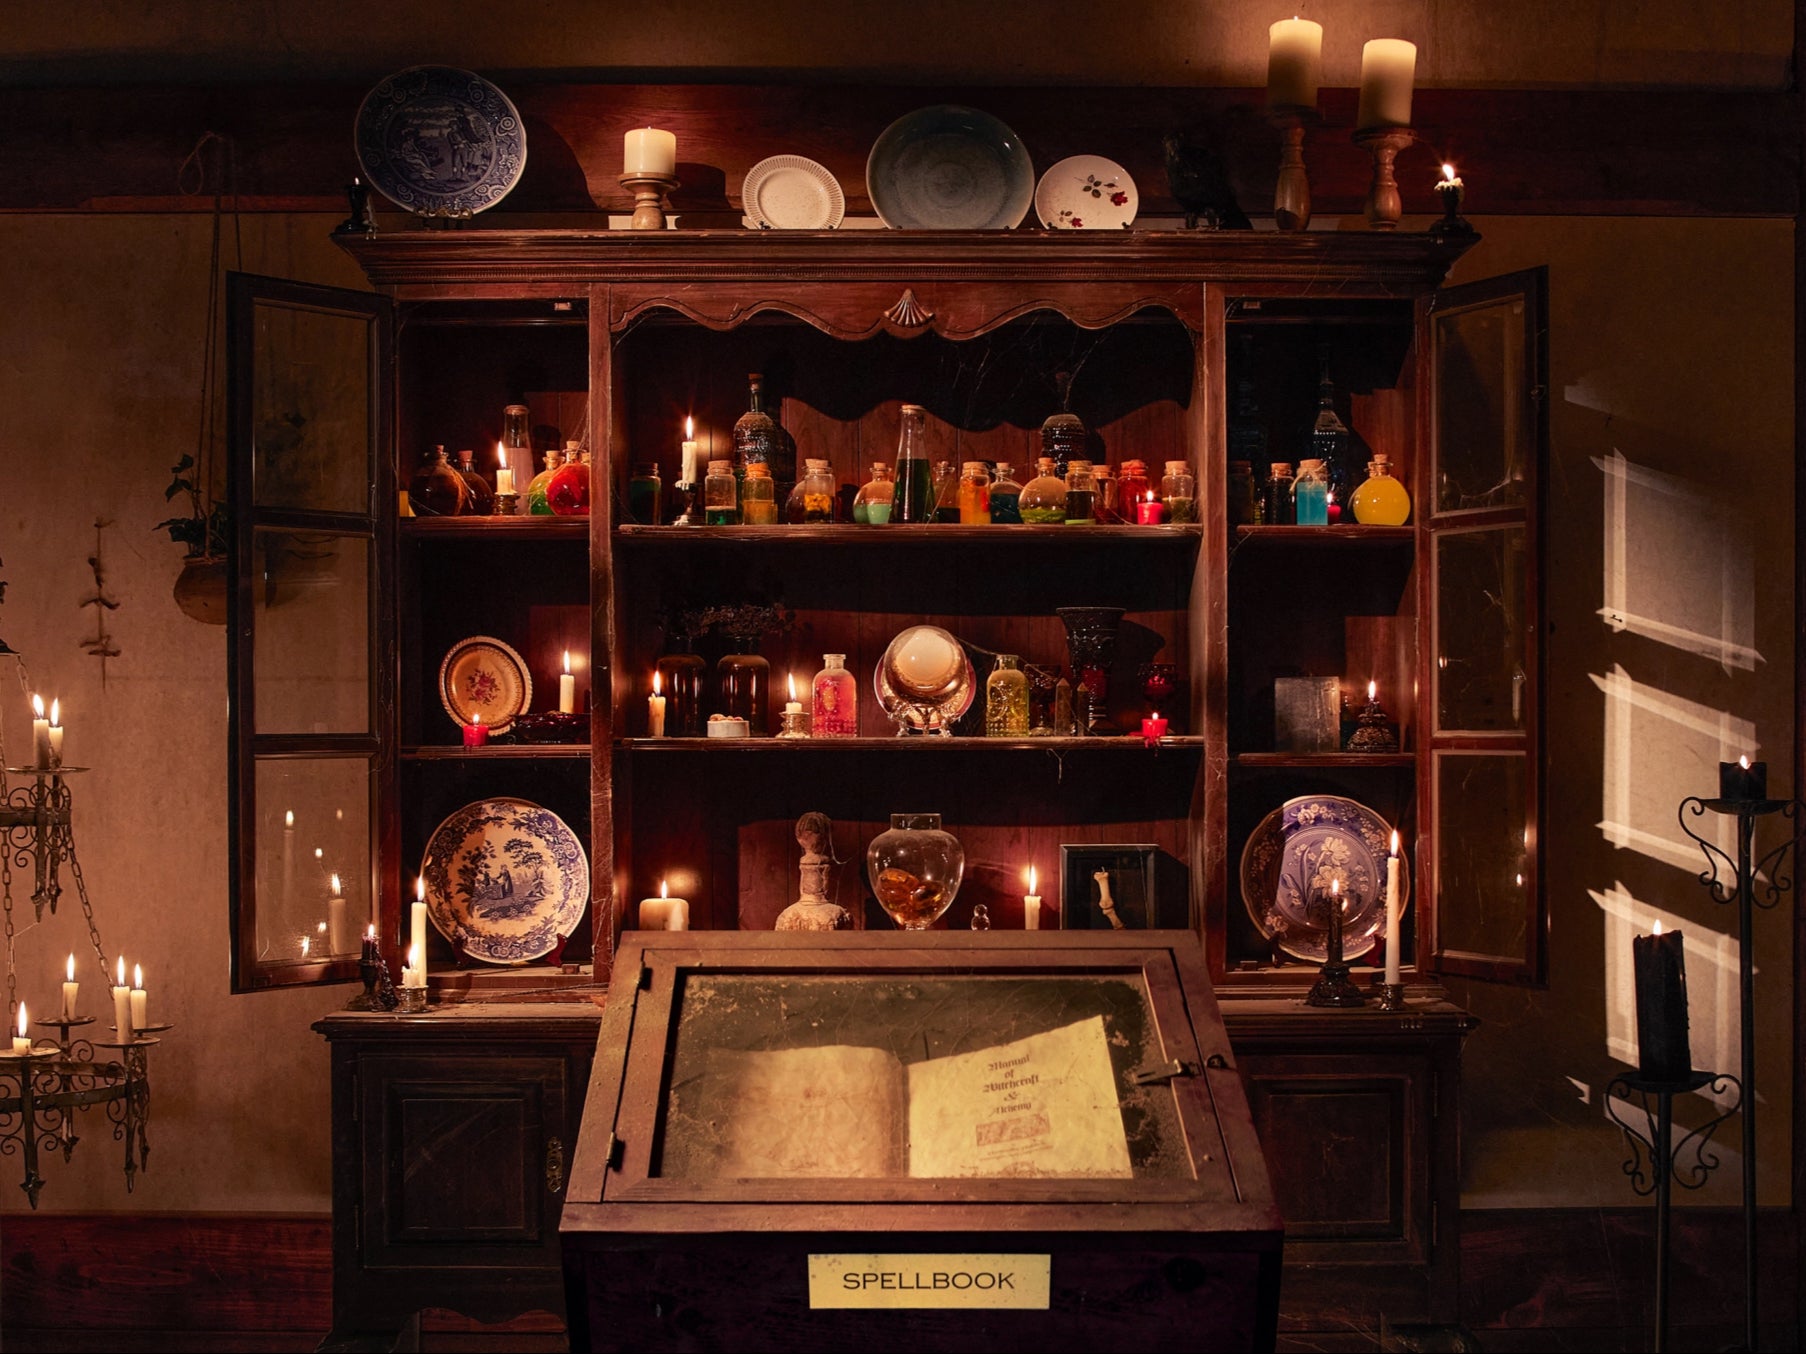 The ‘spellbook’ stands in front of a sideboard filled with bottles of potions